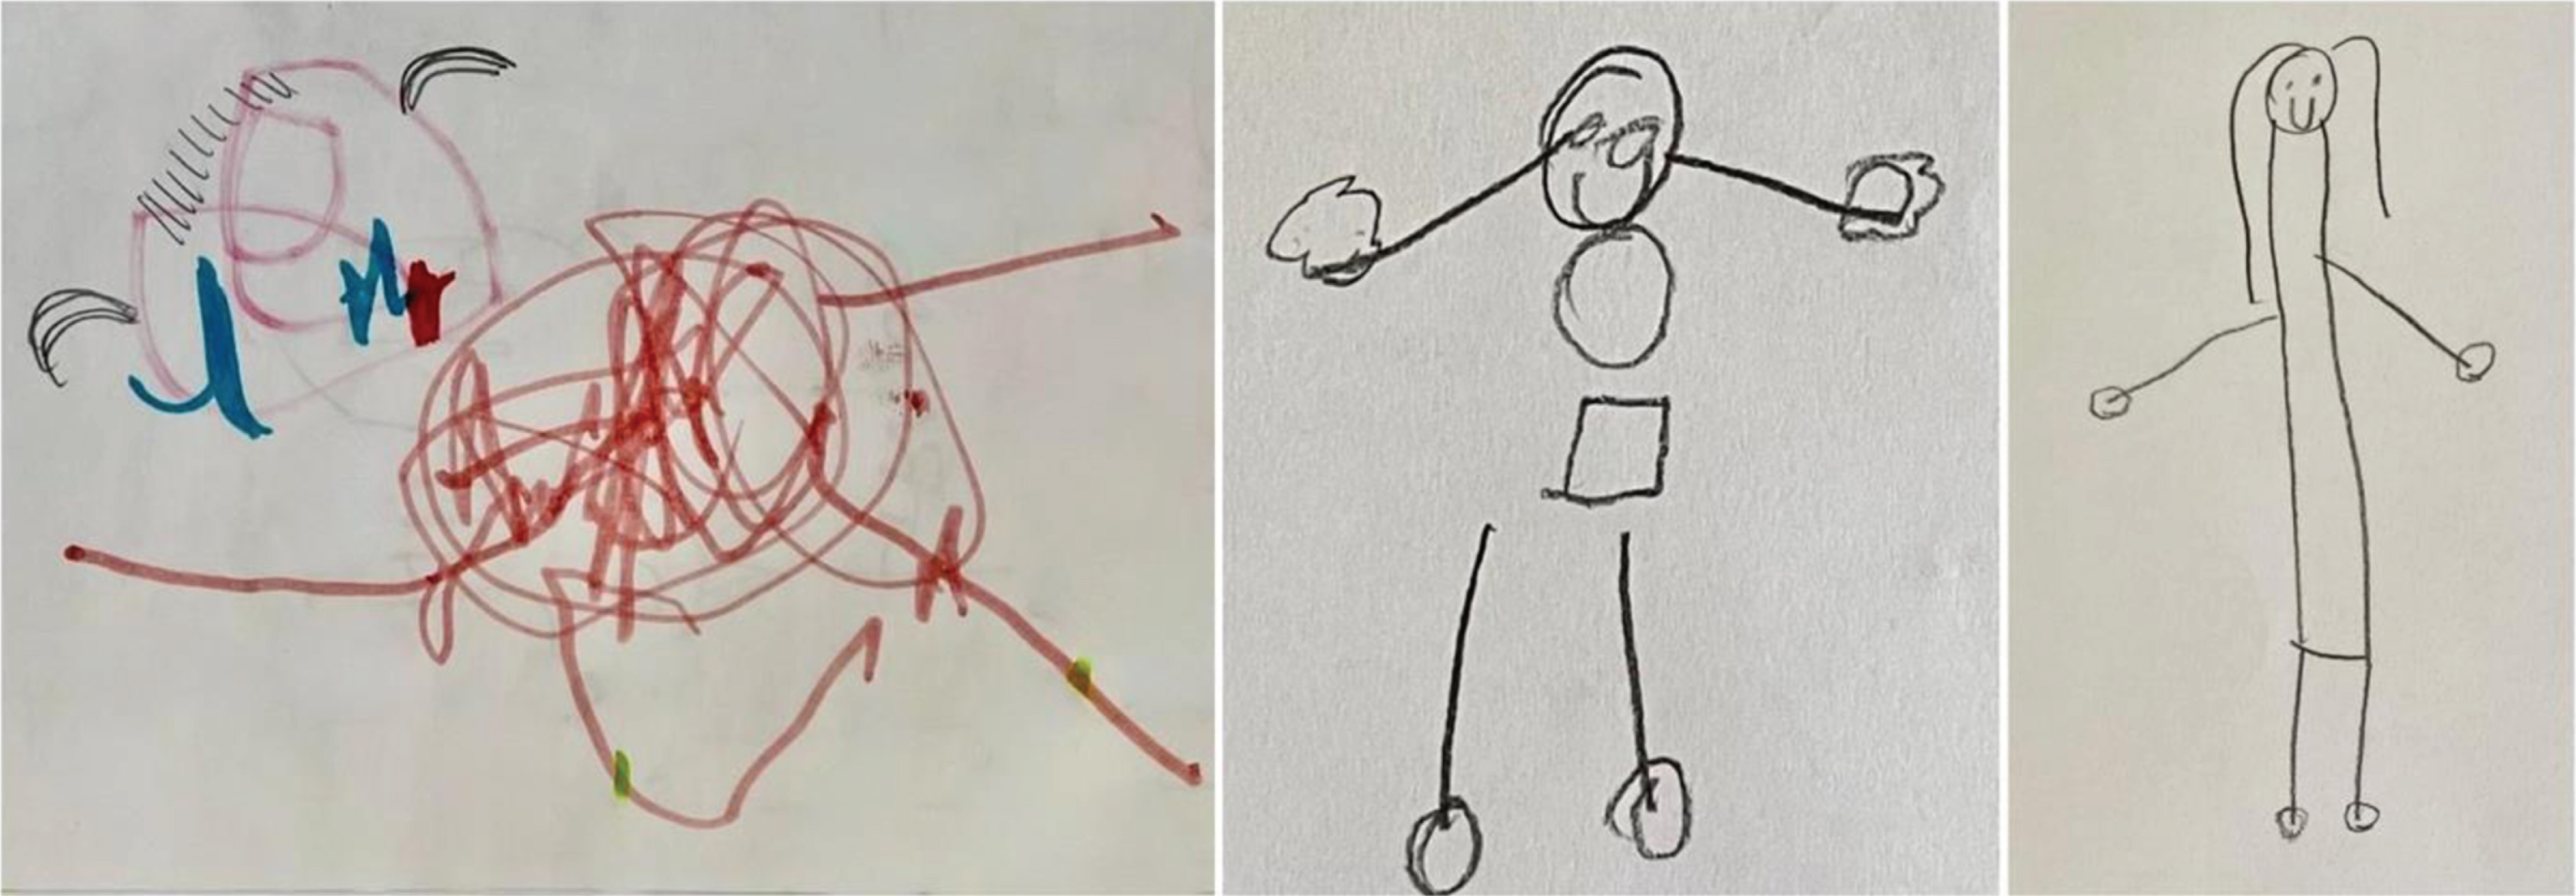 Progress in drawing the human figure. In the most recent version (age 13), some progress was noticed compared to the previous performance. Indeed, the human figure was recognized, the drawing was well-placed on the page, details such as the face with eyes, mouth, and hair were depicted, and the trunk was elongated with correctly placed legs and arms. The drawing matched a mental age of five years.